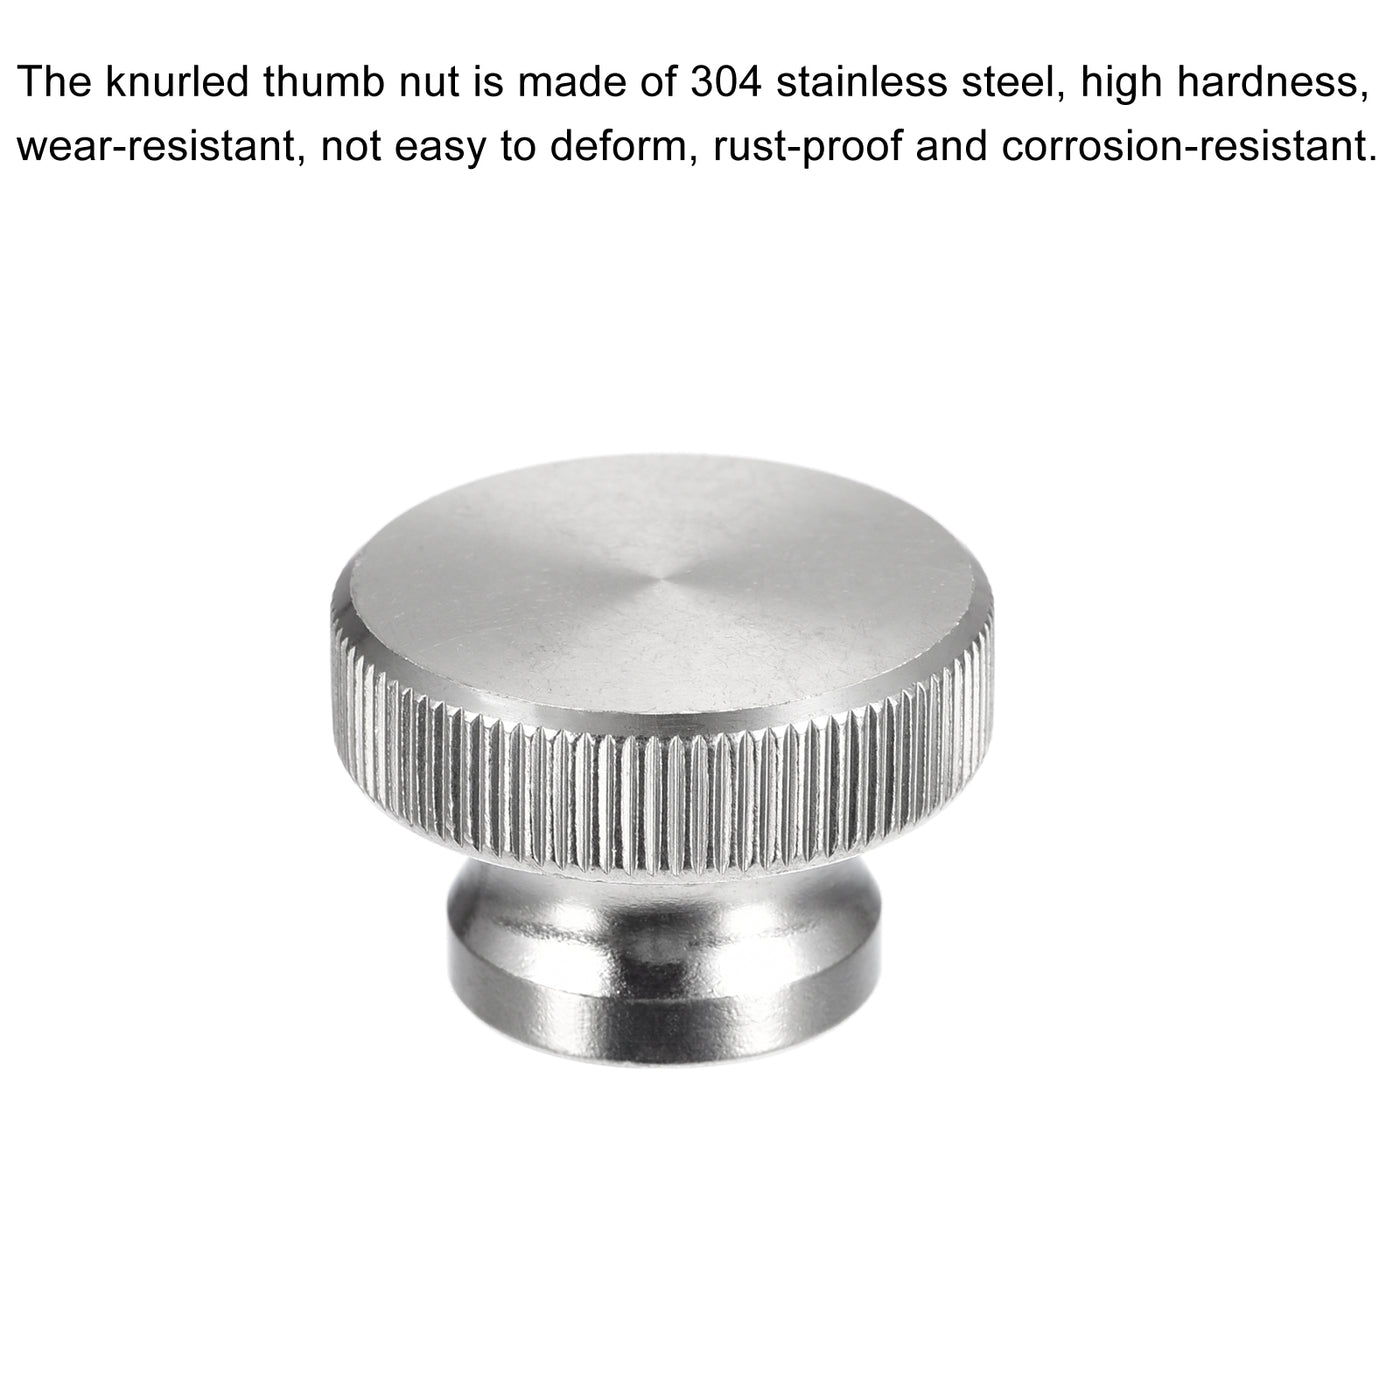 uxcell Uxcell Knurled Thumb Nuts, 4pcs M10 x D30mm x H20mm 304 Stainless Steel Blind Hole Nuts